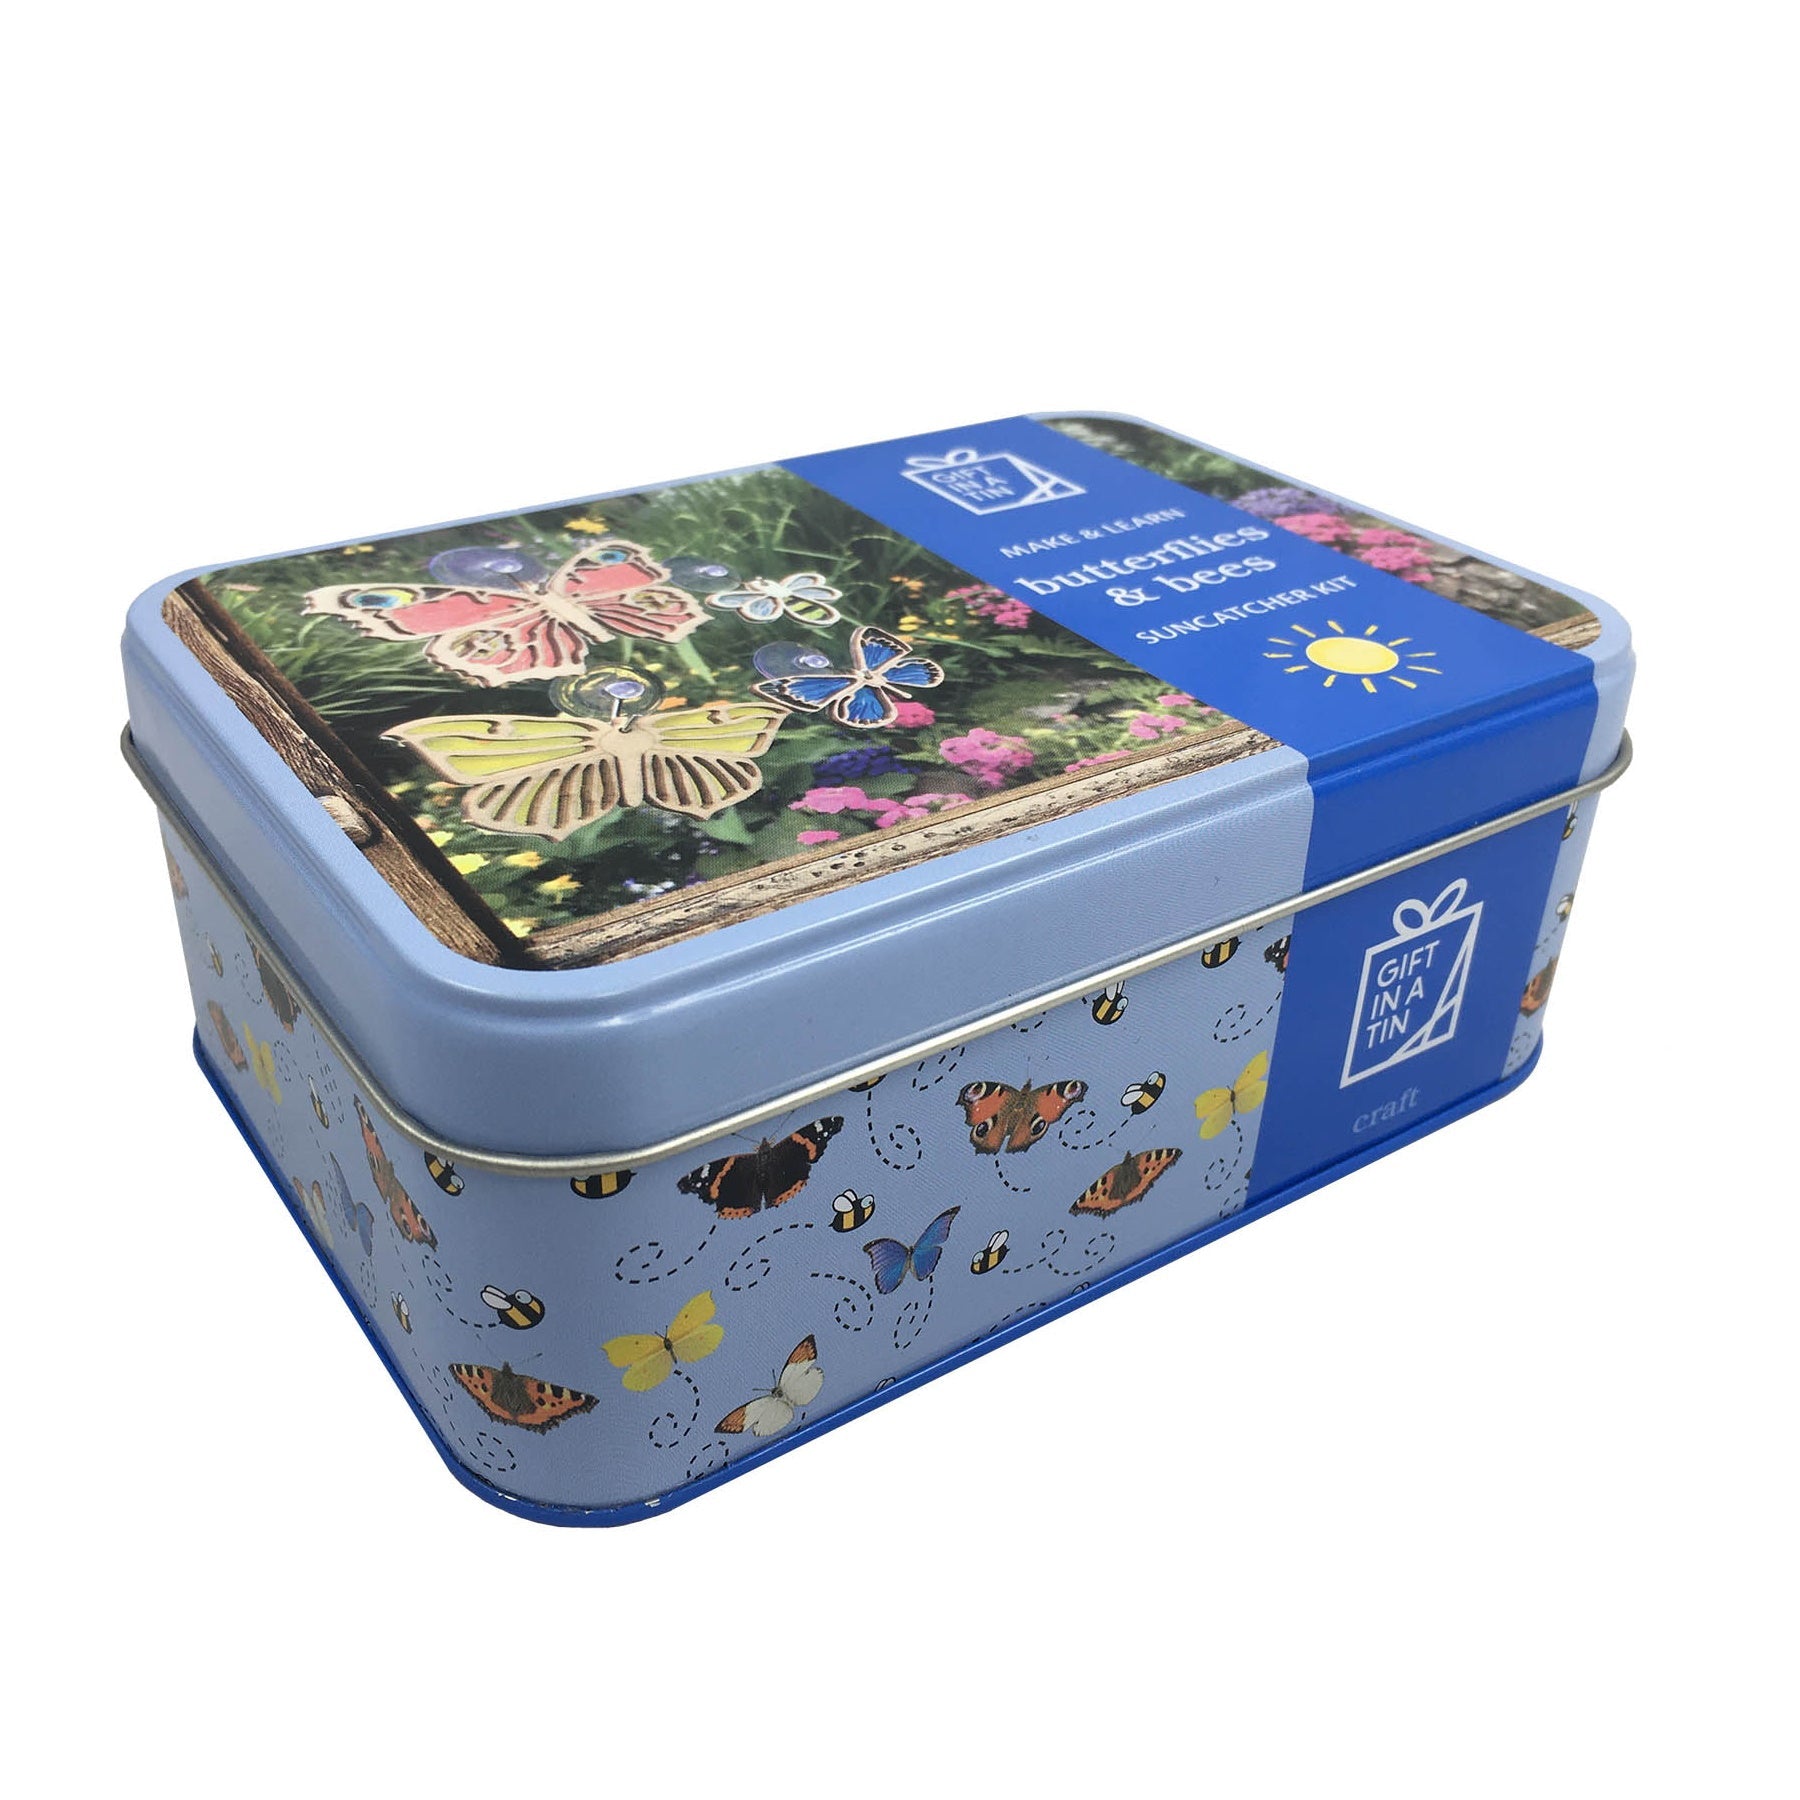 Apples to Pears 101322 Butterflies & Bees Suncatcher Set In A Tin - Premium Giftware from Apples to Pears Ltd - Just $13.99! Shop now at W Hurst & Son (IW) Ltd